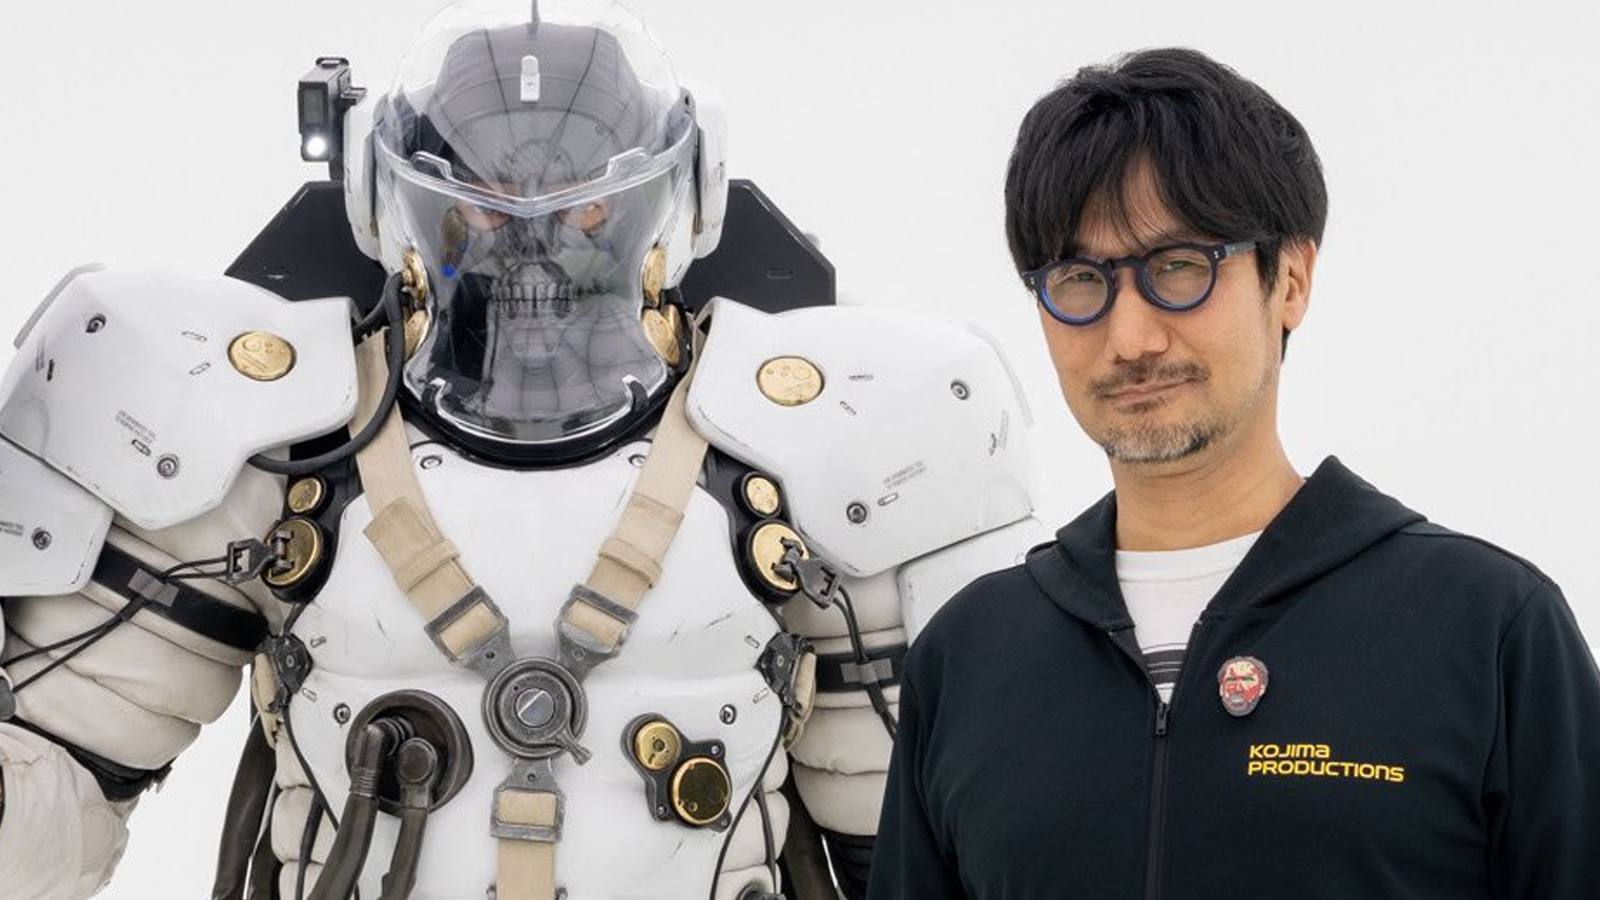 Hideo Kojima Is Turning His Death Stranding Video Game Into A